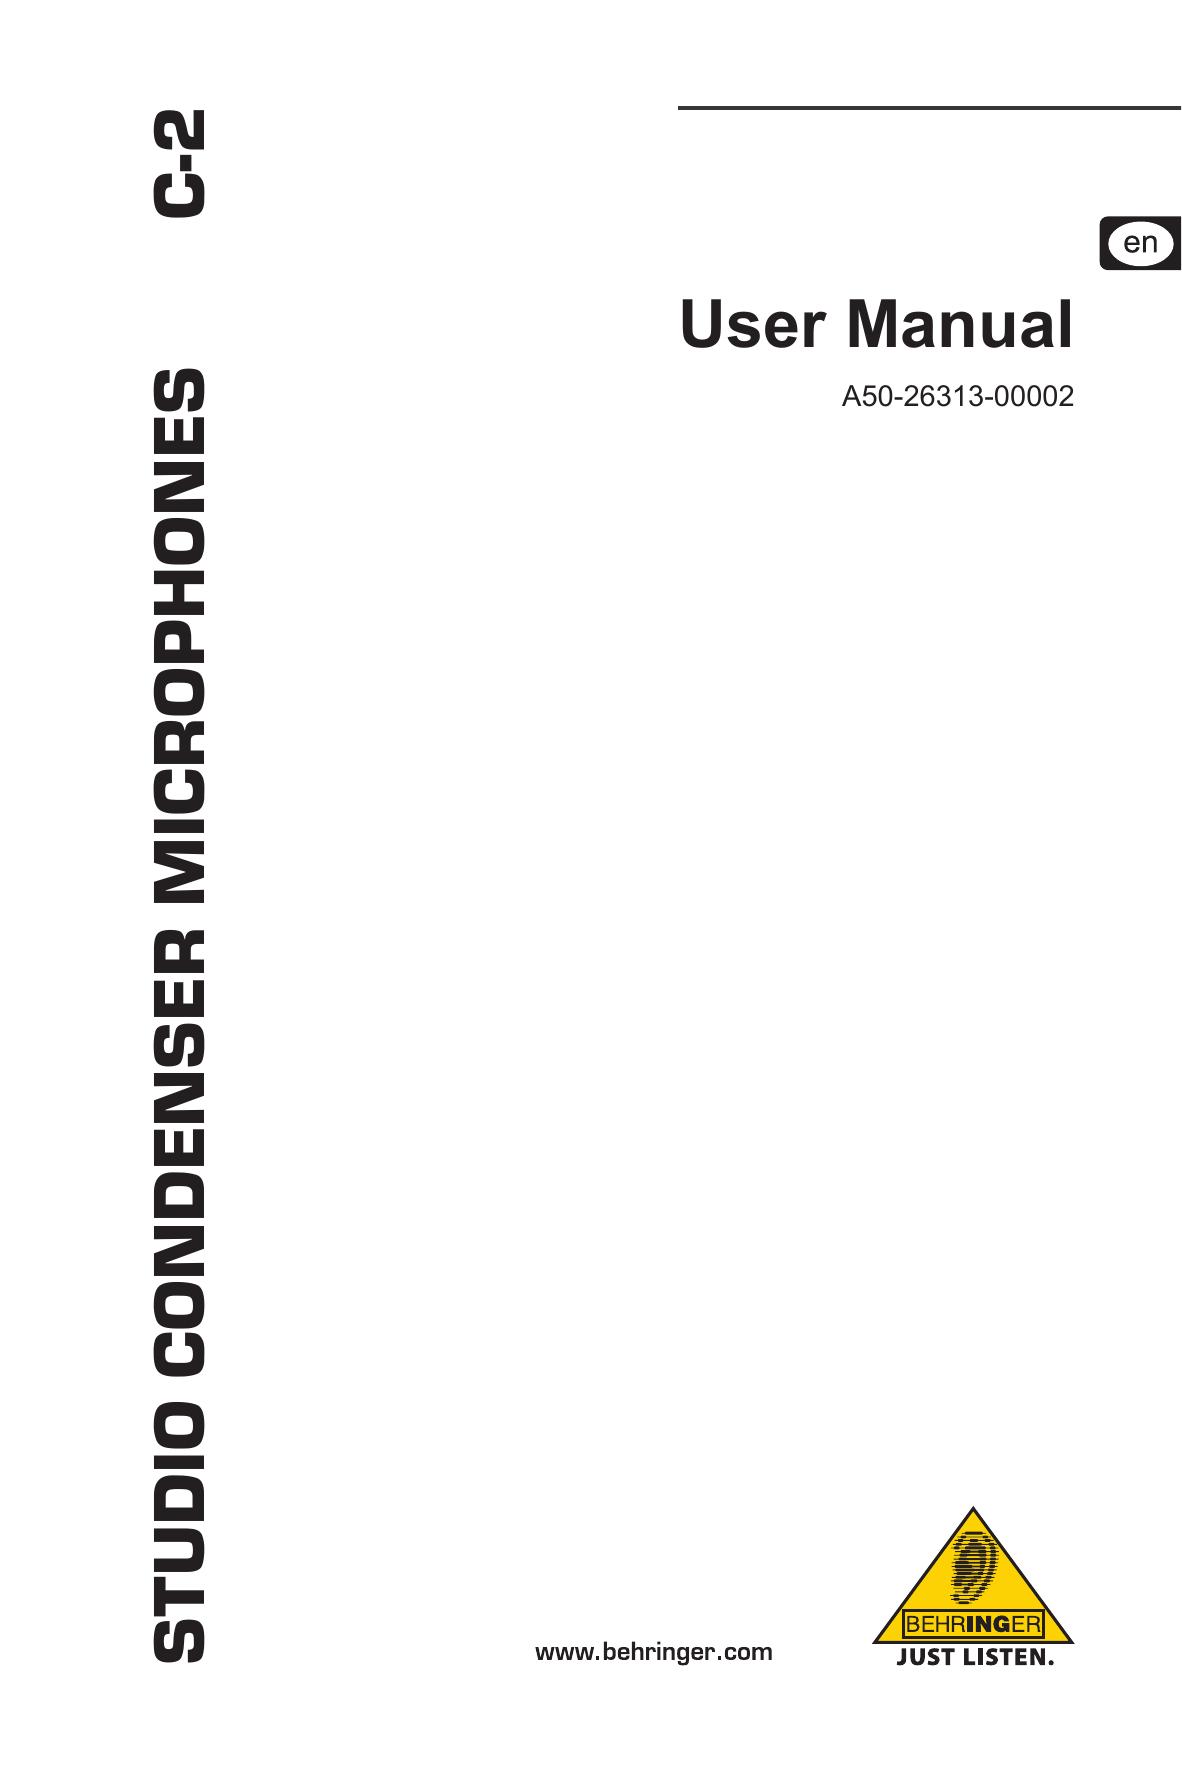 Behringer A50-26313-00002 Microphone User Manual